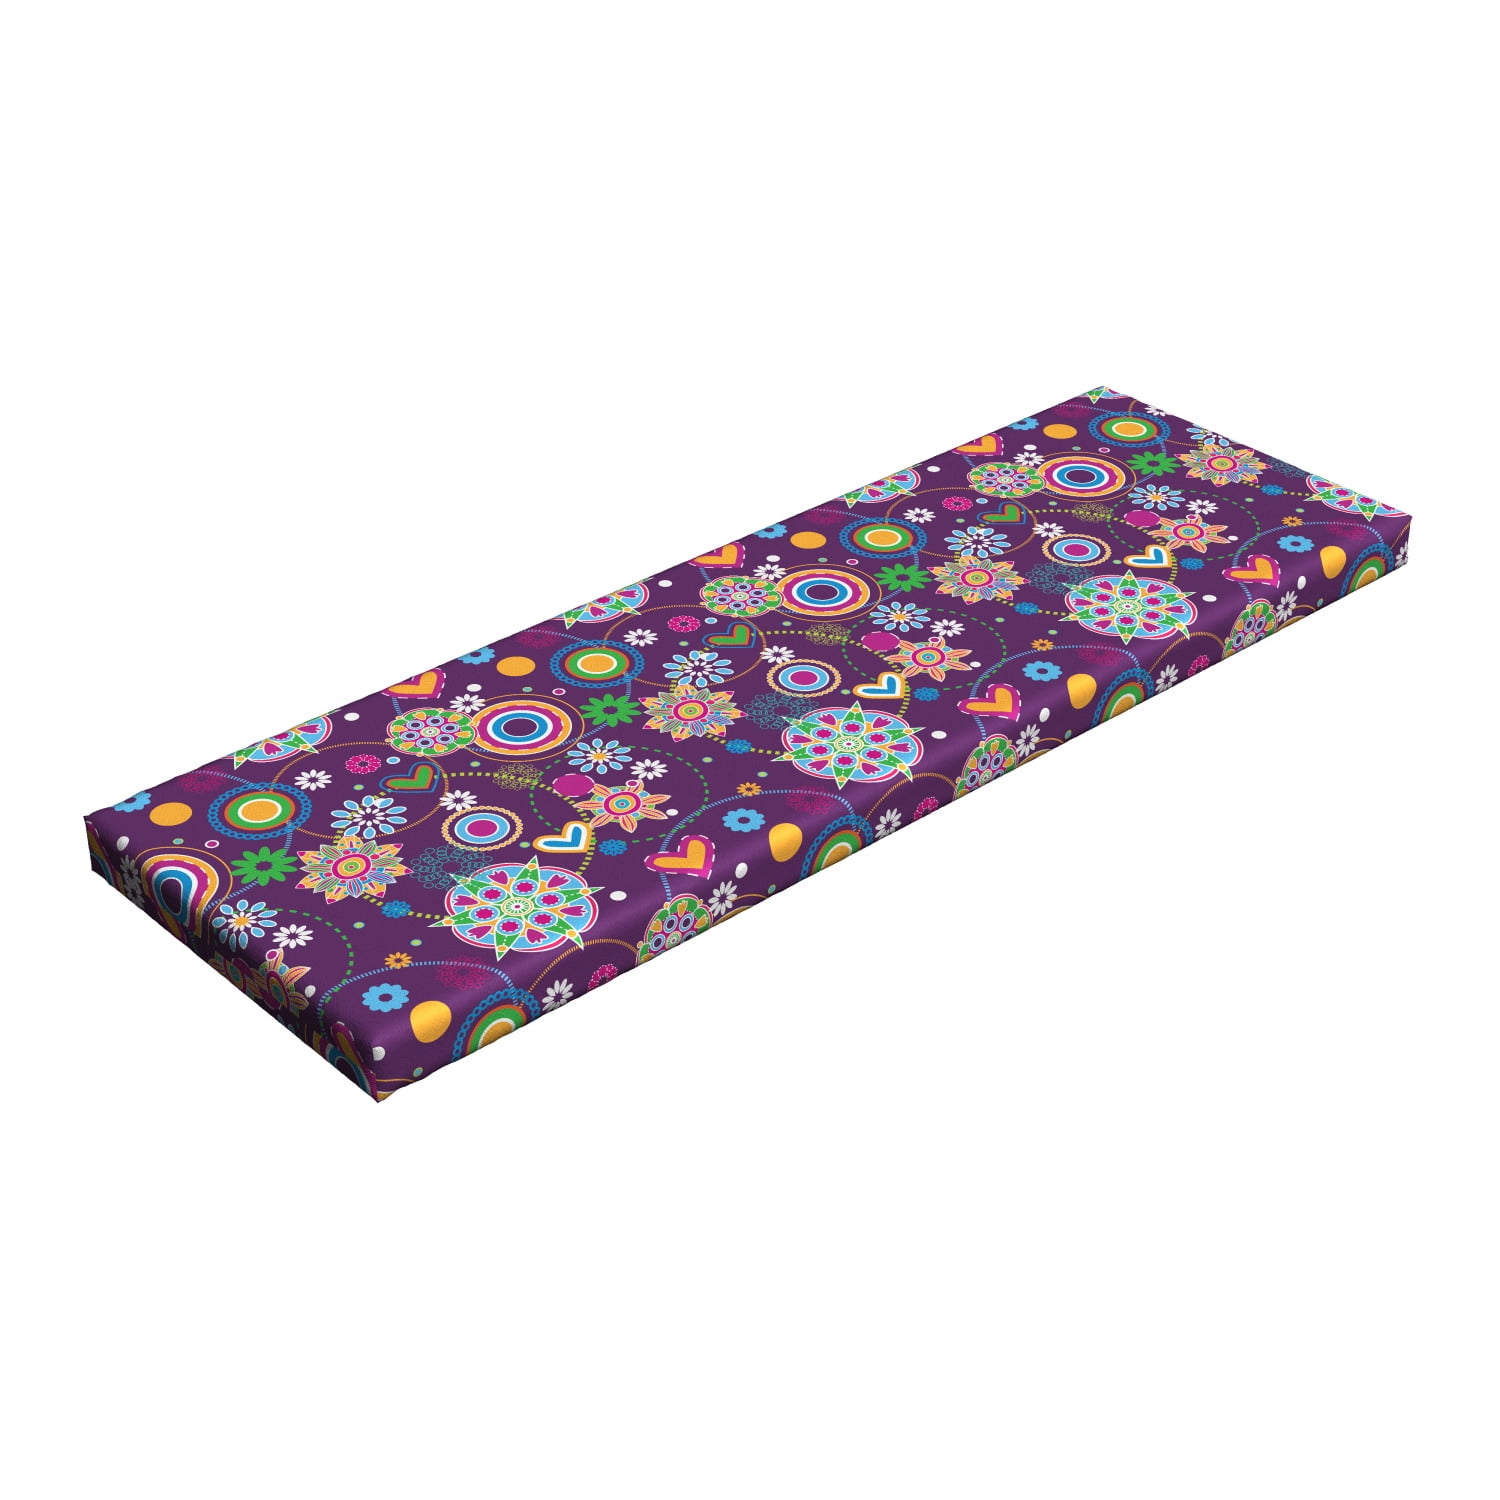 Hippie Bench Pad, Sixties Style Illustration with Peace and Love Themes ...